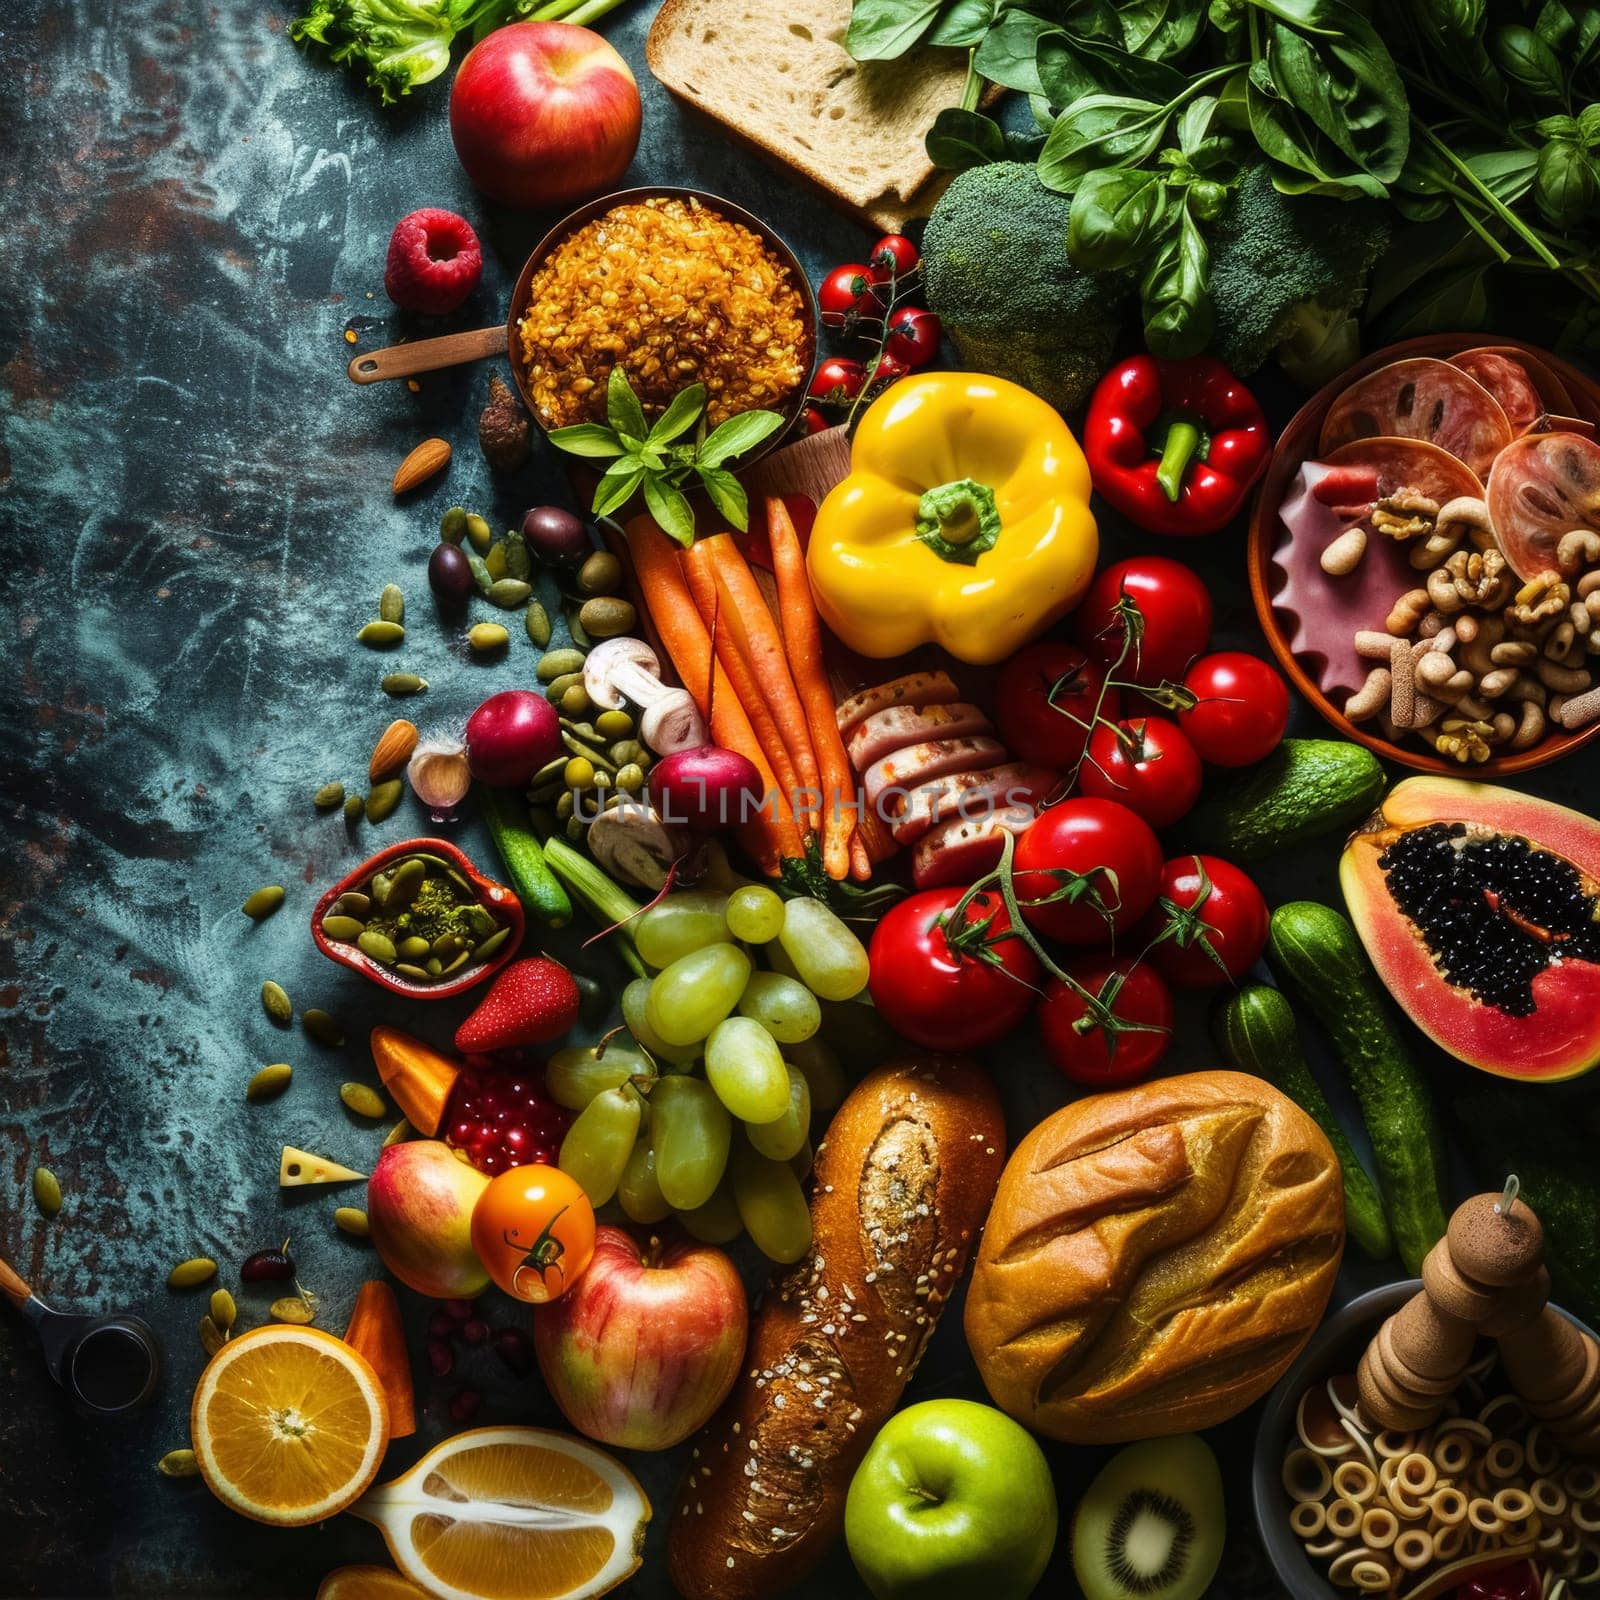 An assortment of fresh Mediterranean diet ingredients showcases a colorful feast for the senses. The image captures the essence of wholesome nutrition